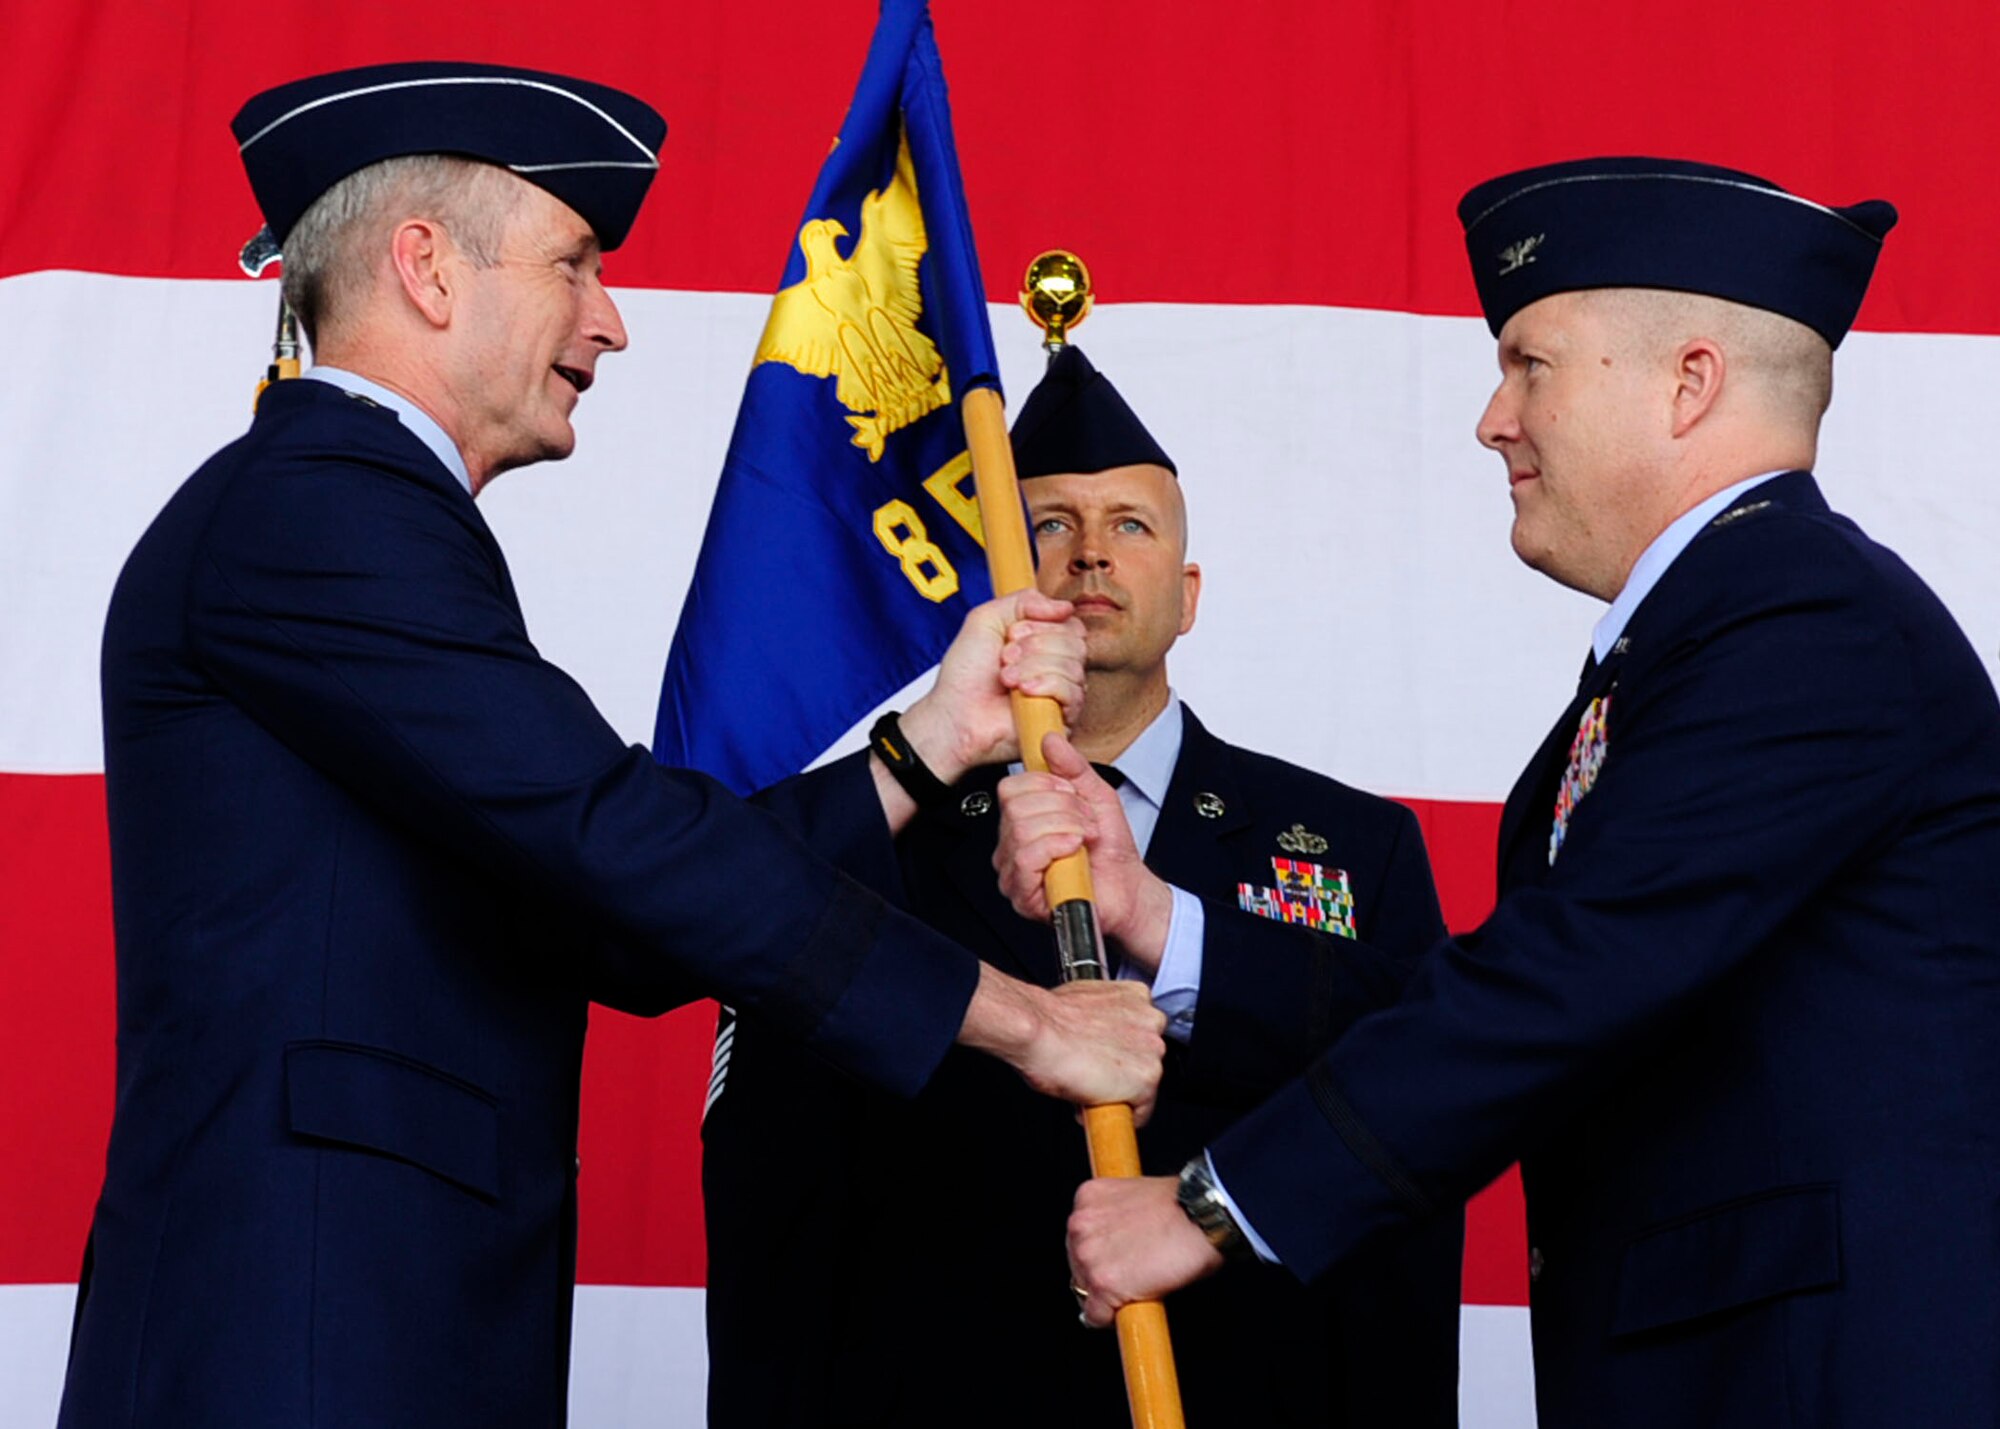 Lt. Gen. Terrence O’Shaughnessy, 7th Air Force commander, transfers command to Col. Todd “Wolf” Dozier, 8th Fighter Wing commander, during the 8th FW change of command ceremony at Kunsan Air Base, Republic of Korea, May 20, 2016. (U.S. Air Force photo by Staff Sgt. Chelsea Browning/Released)